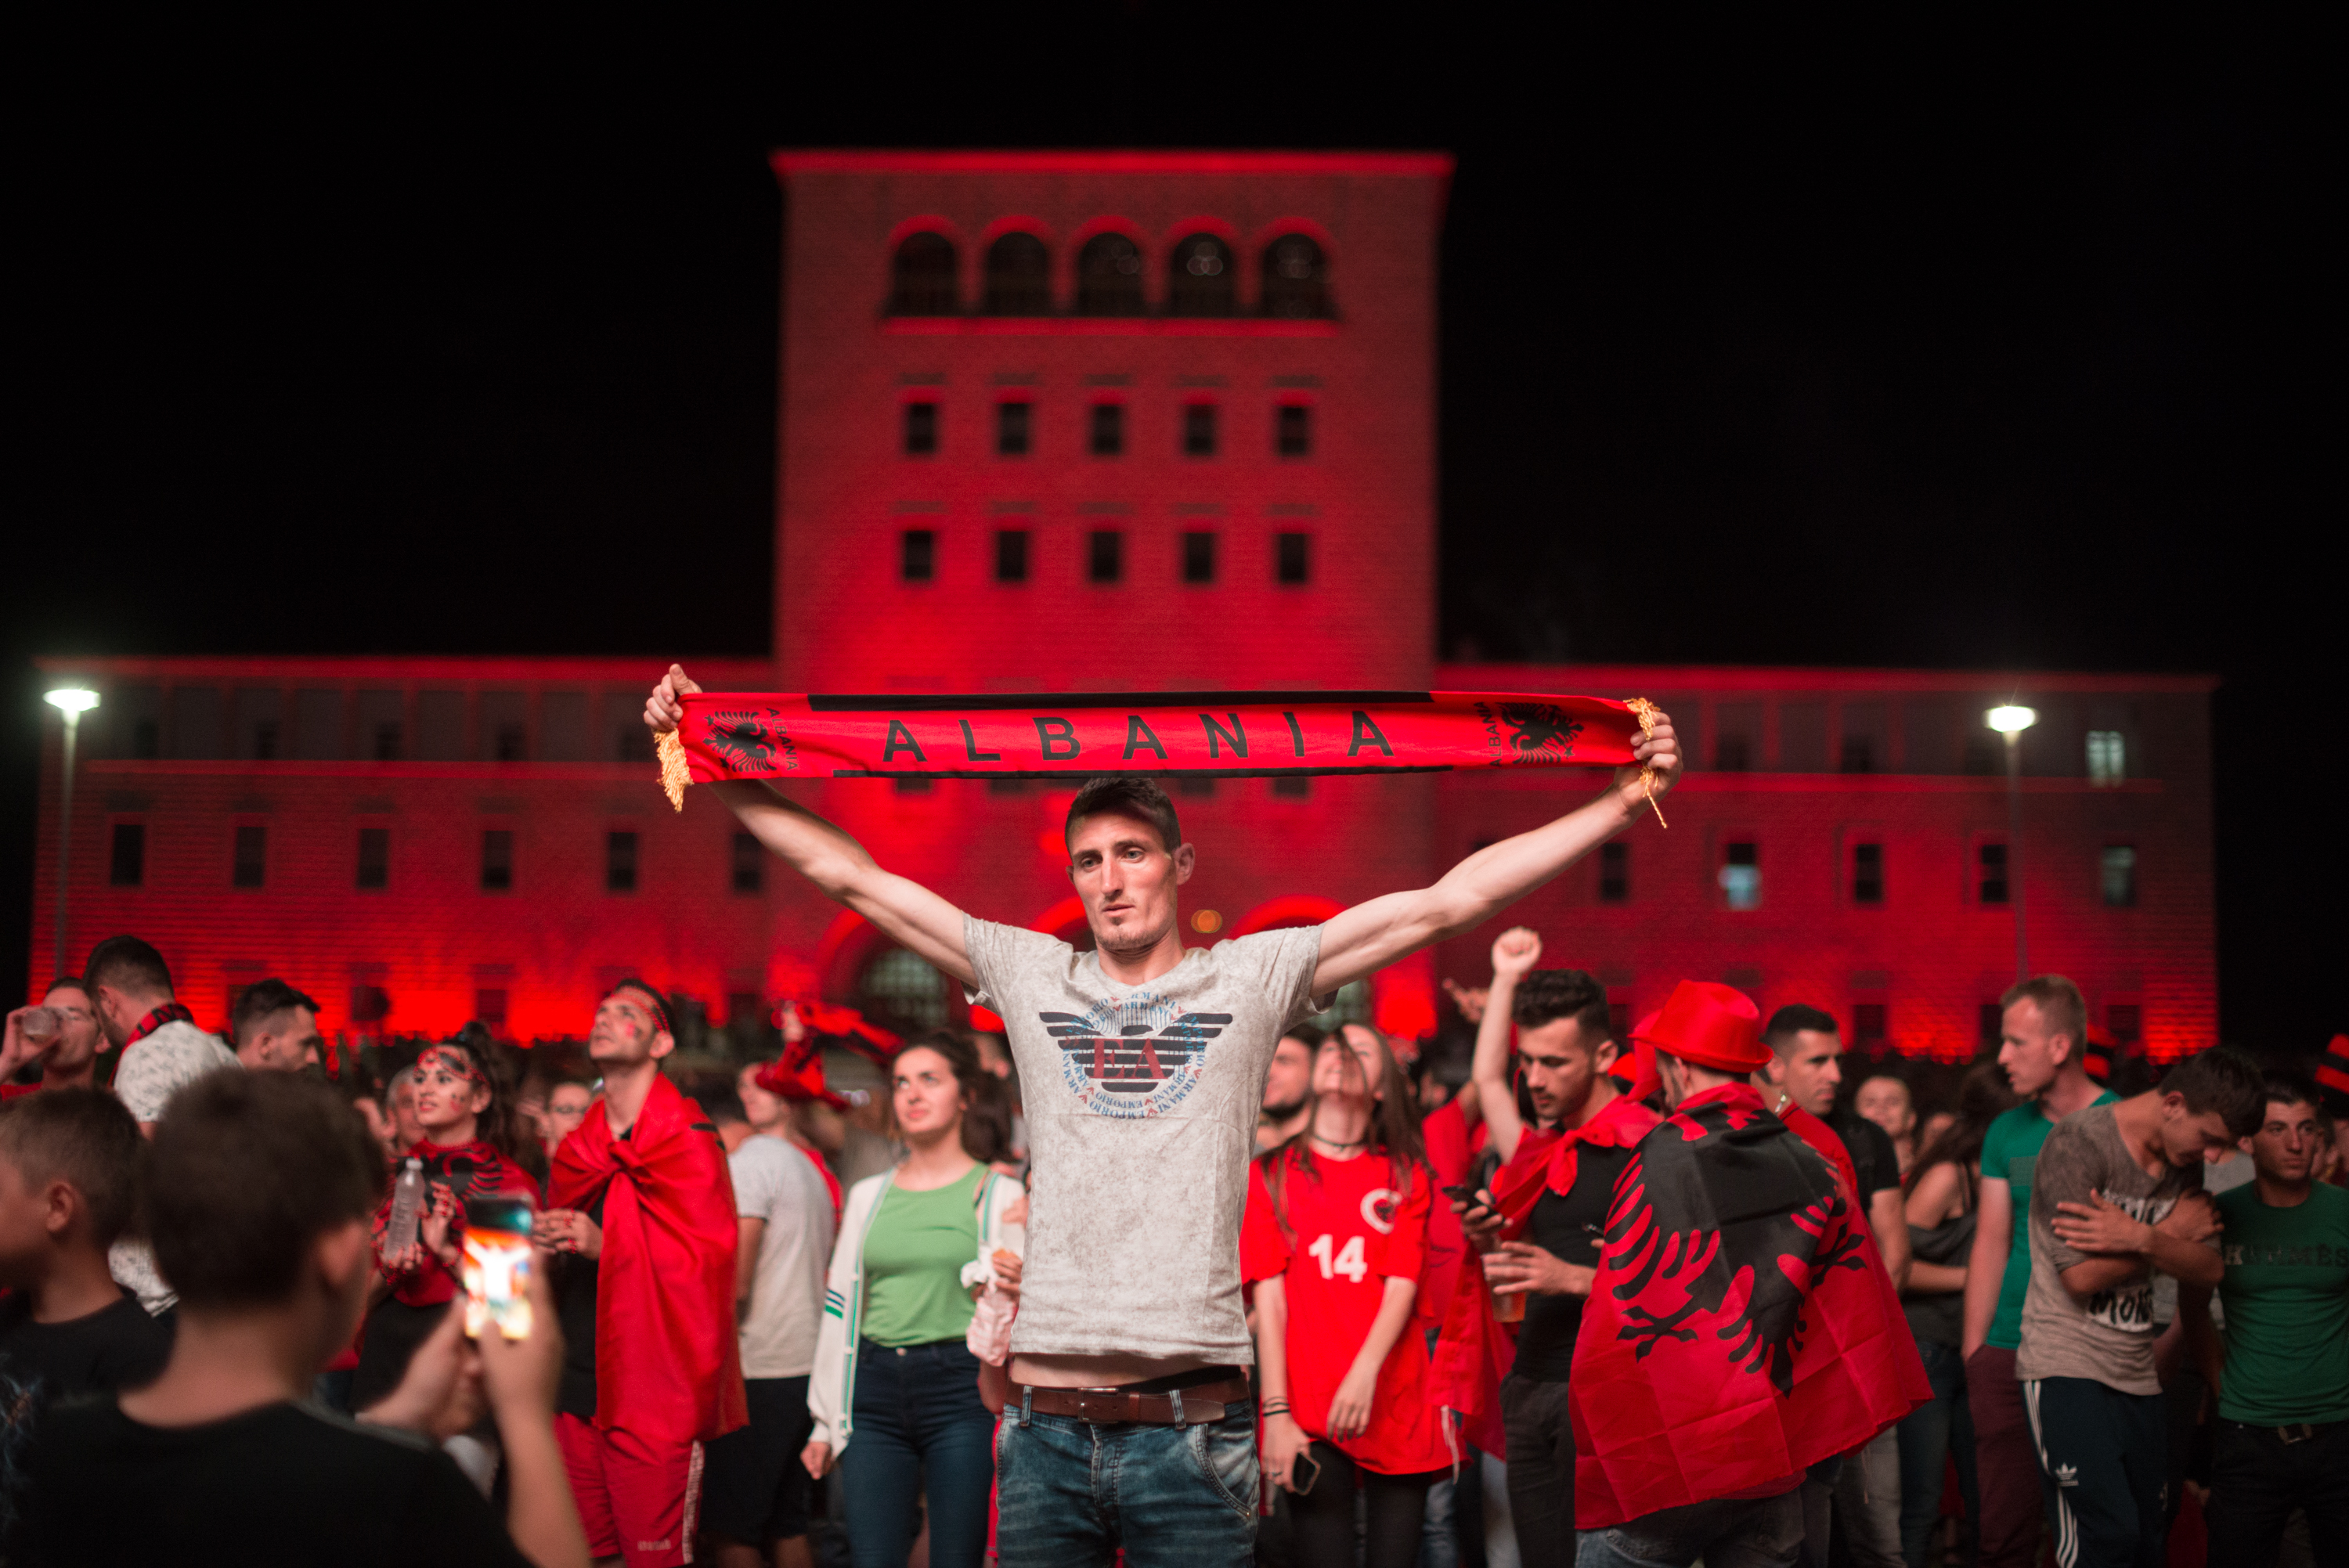 Albanian soccer fans celebrate after their country won the Group A match against Romania in Tirana, Albania on Sunday June 19, 2016. Albania defeated Romania 1-0.